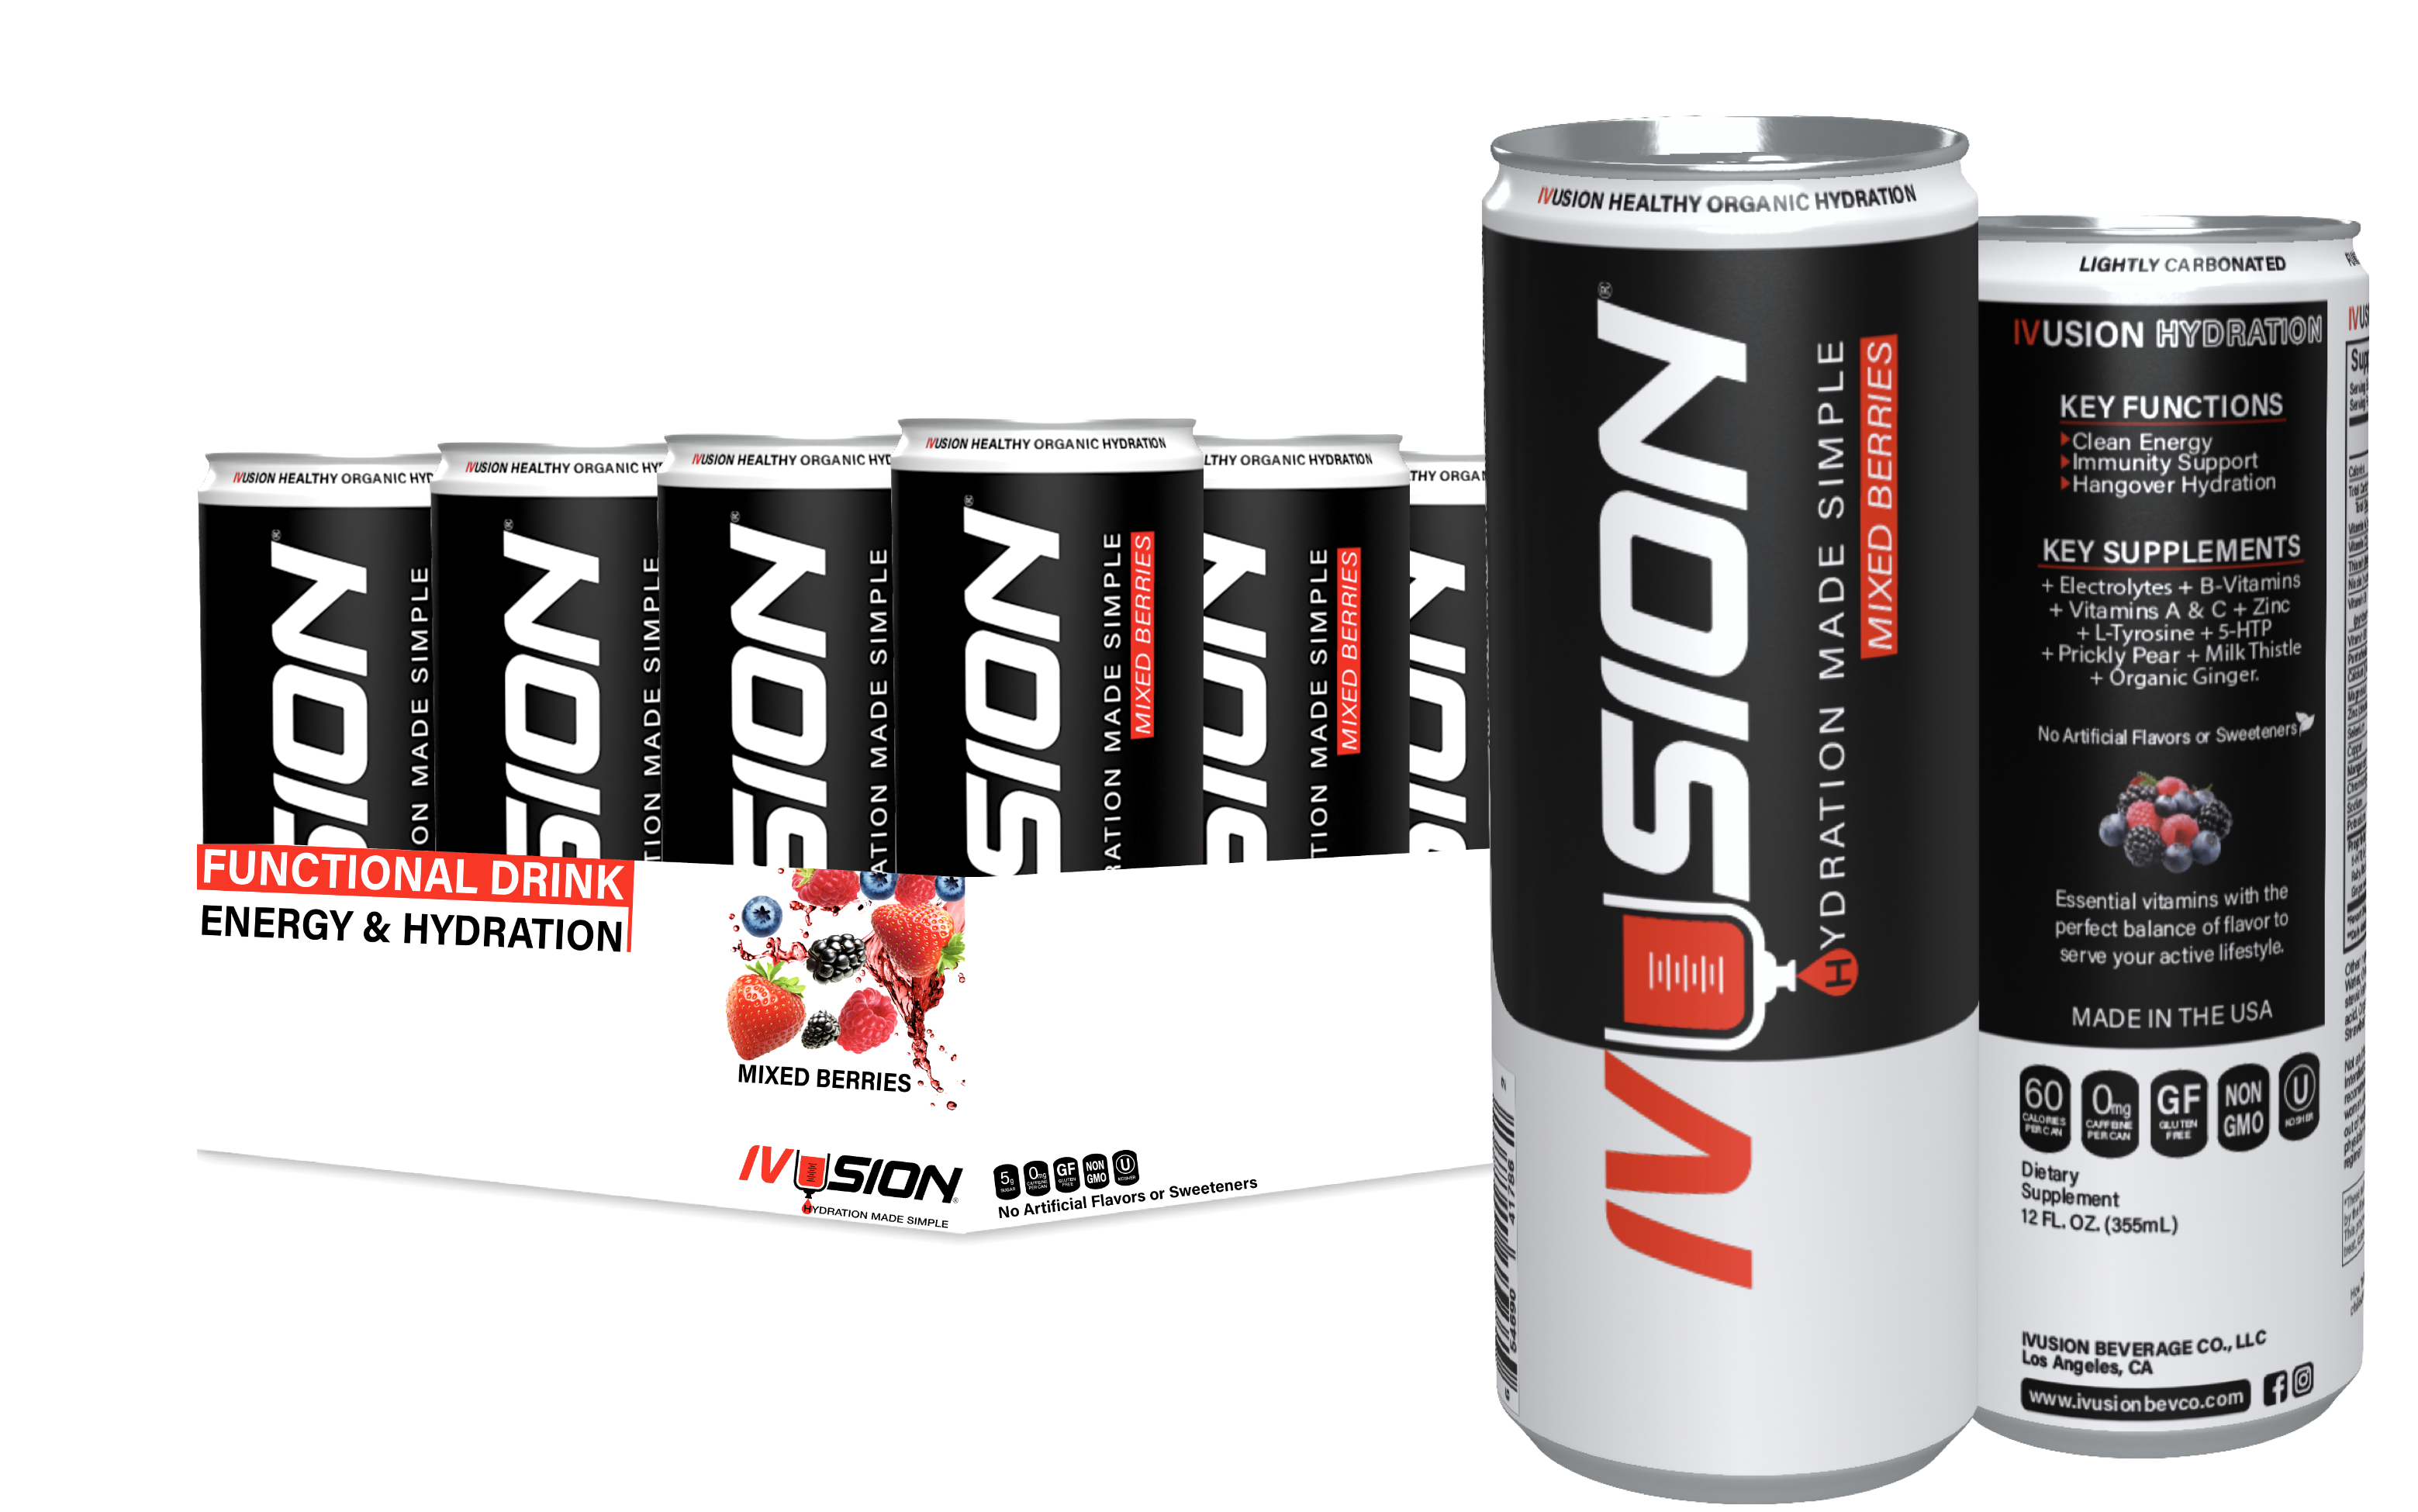 electrolyte mix drink hydration - ivusion berries flavor